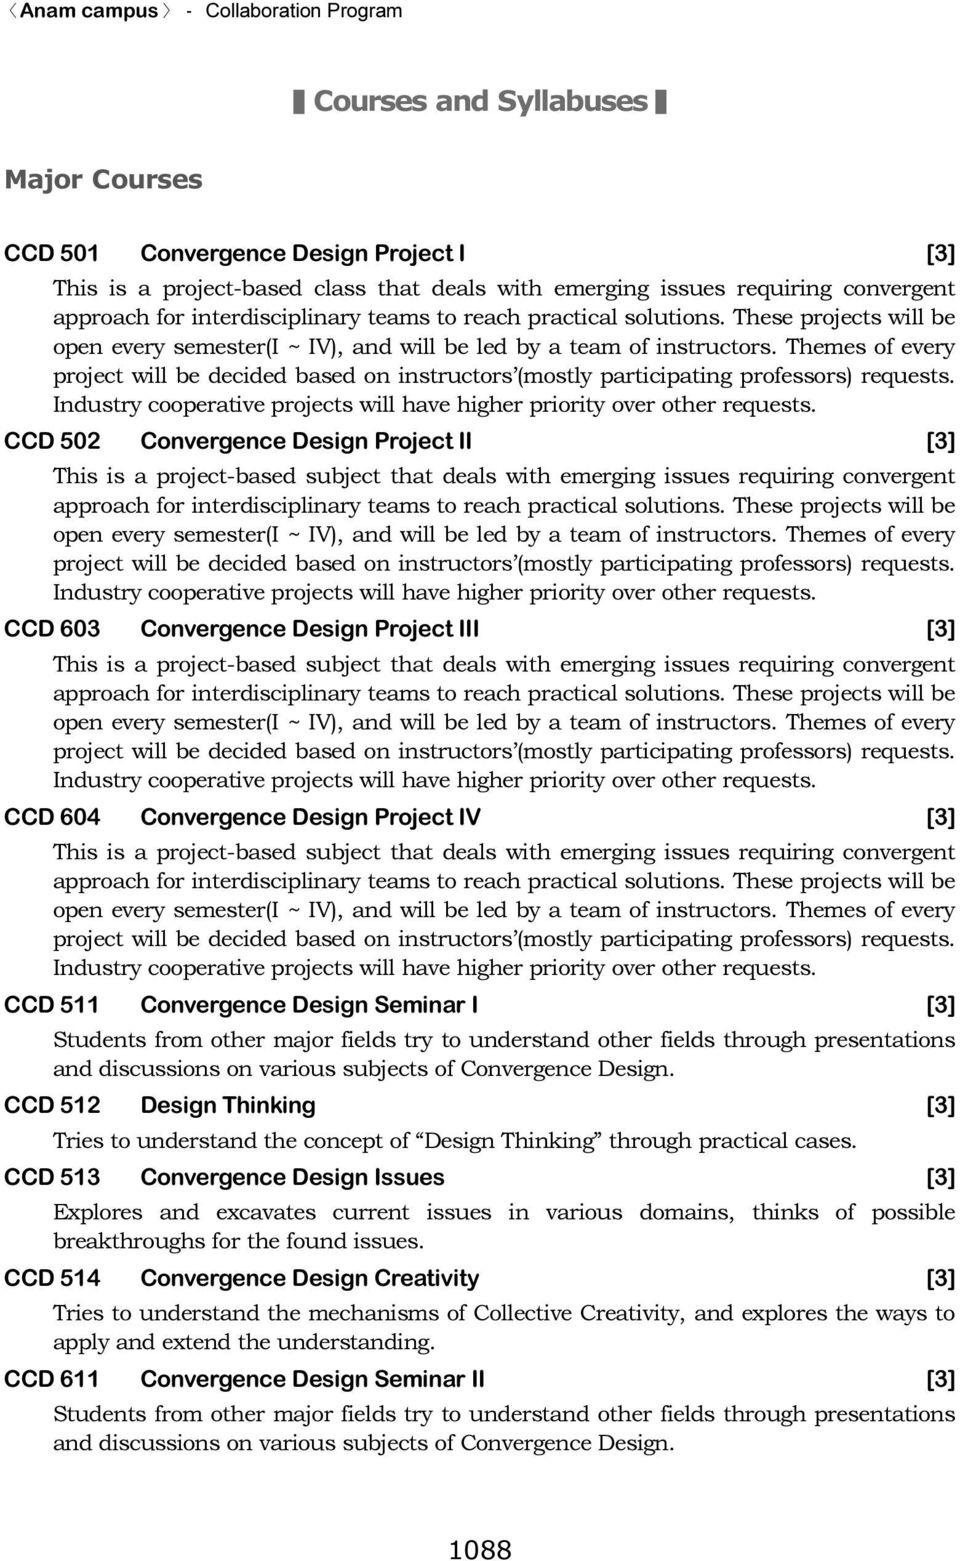 subject that deals with emerging issues requiring convergent CCD 604 Convergence Design Project IV [3] This is a project-based subject that deals with emerging issues requiring convergent CCD 511